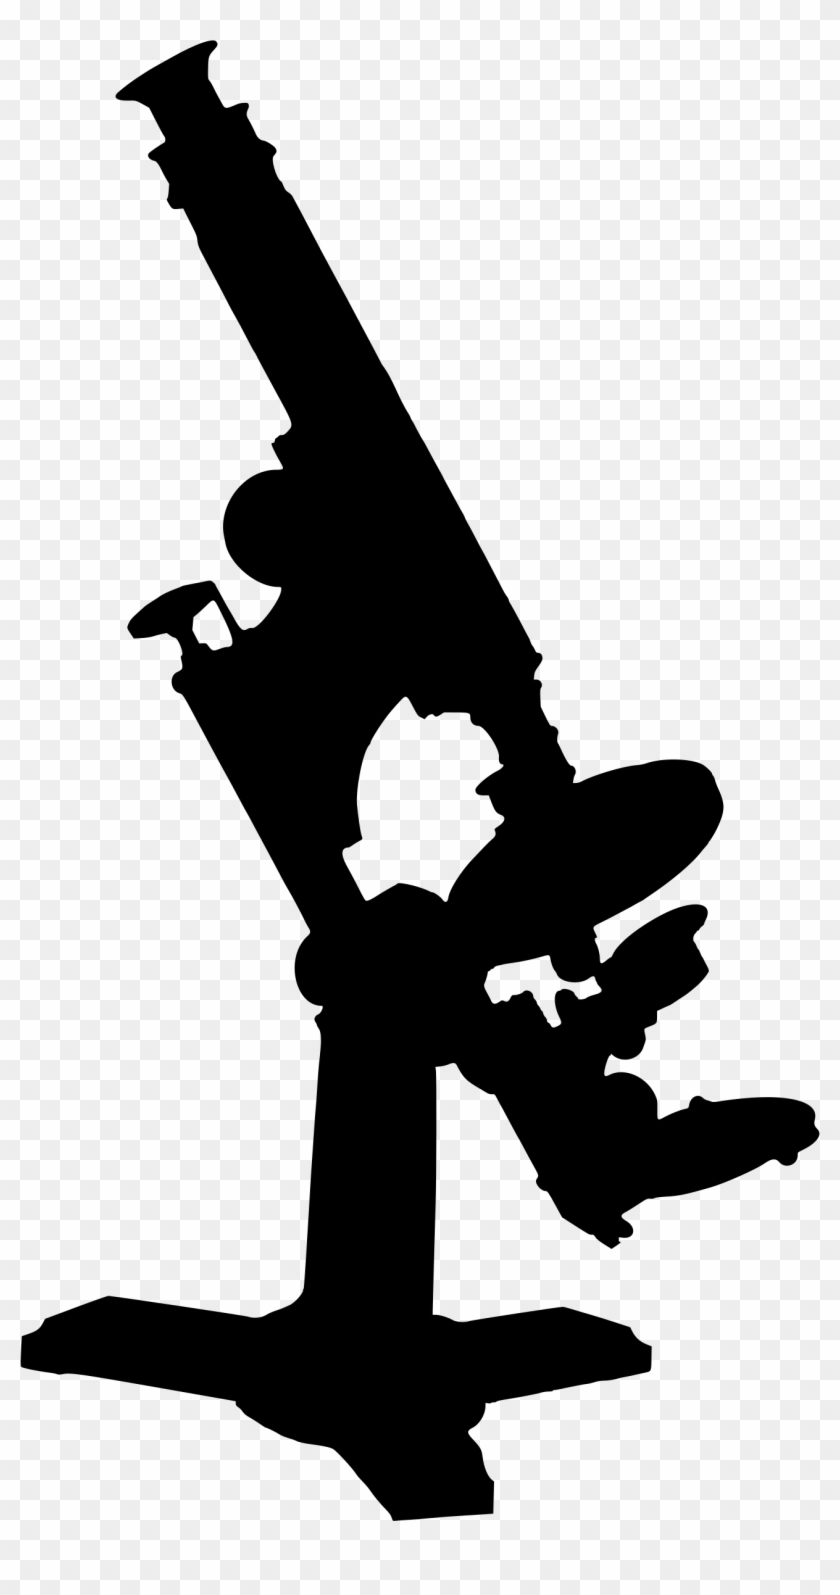 This Free Icons Png Design Of Microscope Silhouette - Silhouette Microscope Png Clipart #2097765